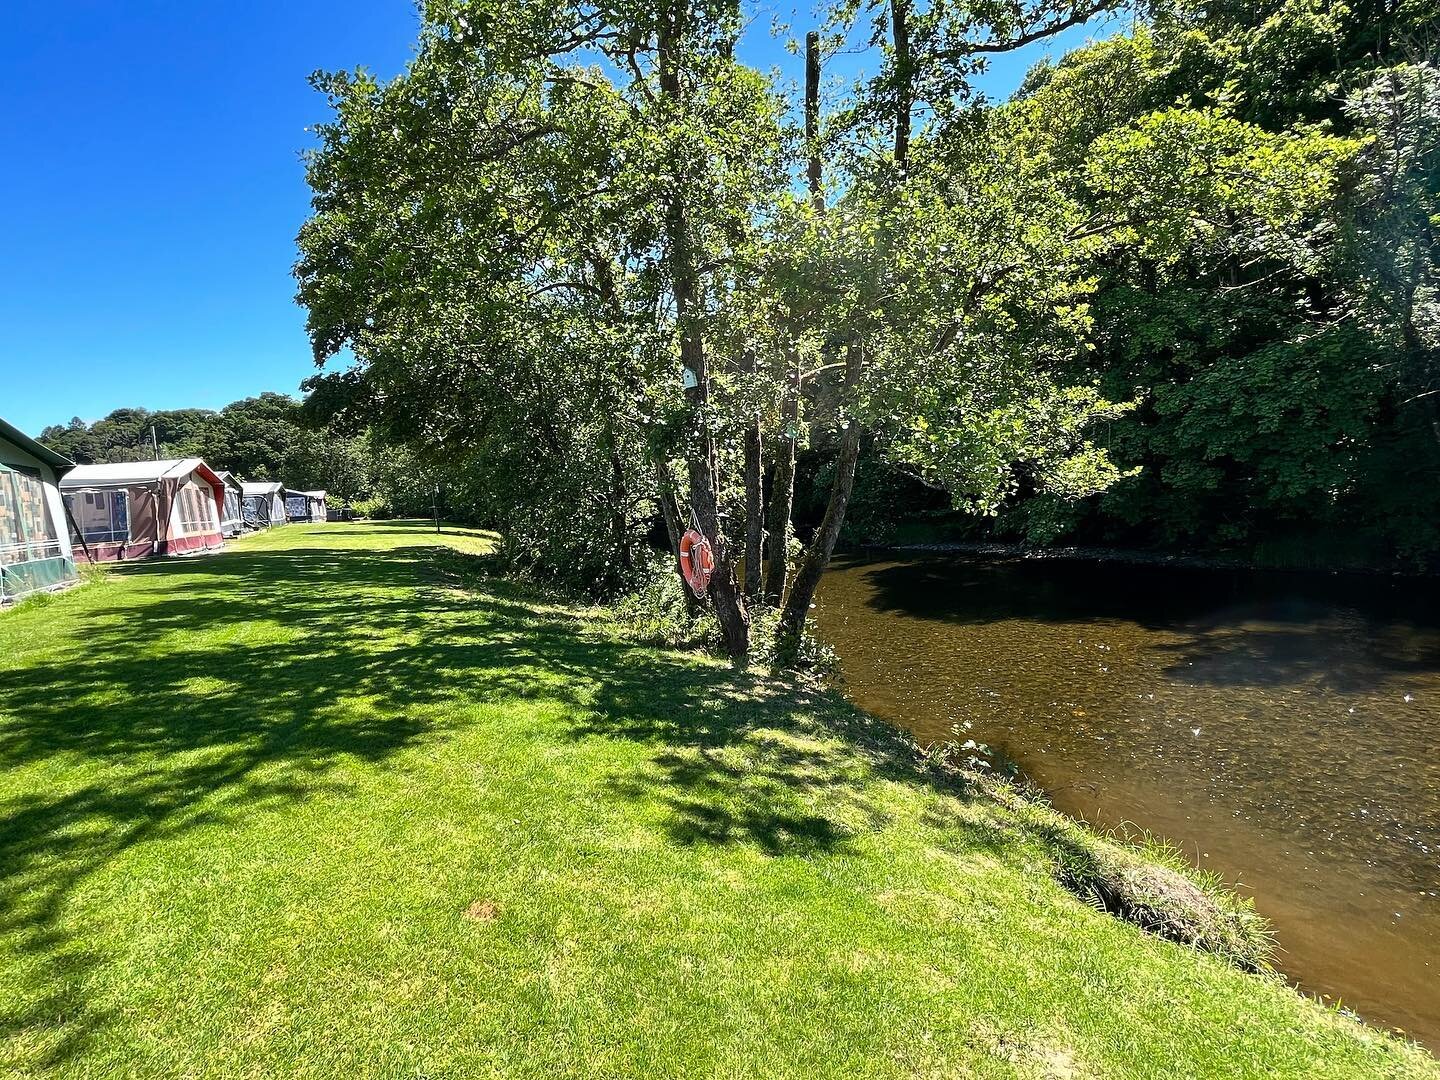 Summer has arrived in perfect timing for the weekend 🌼☀️

The river bank always looks so beautiful &amp; tranquil 🕊

#riversidecaravanandcampingpark #riverside #llangammarchwells #beautiful #beautifulscenery #bluesky #trees #nature #tranquility #pe